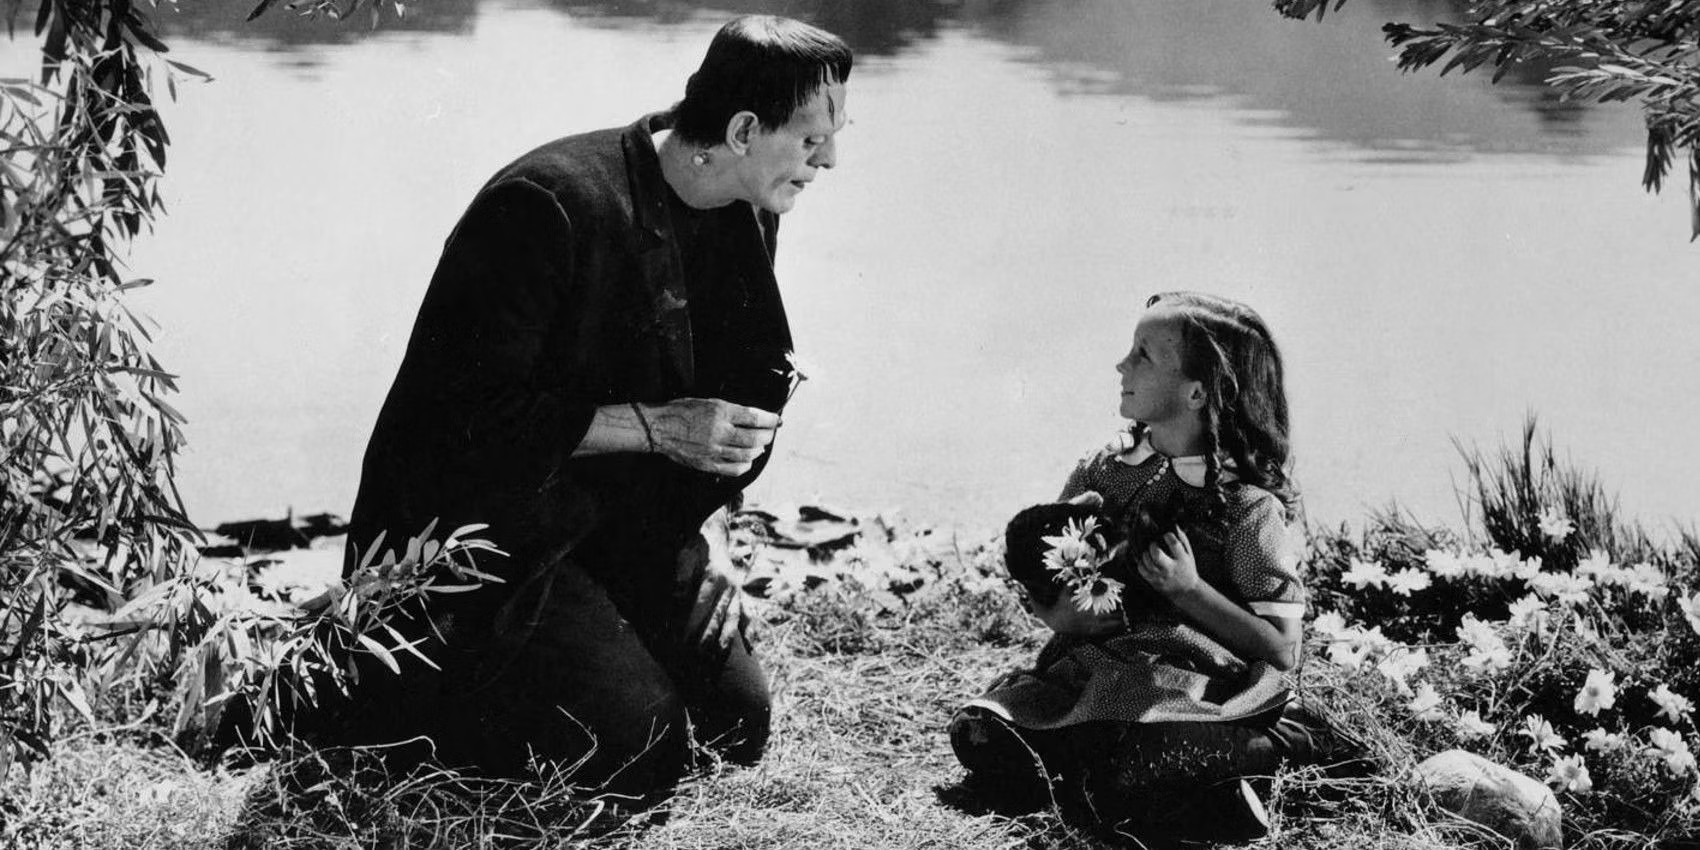 The Creature encounters a little girl in Frankenstein.